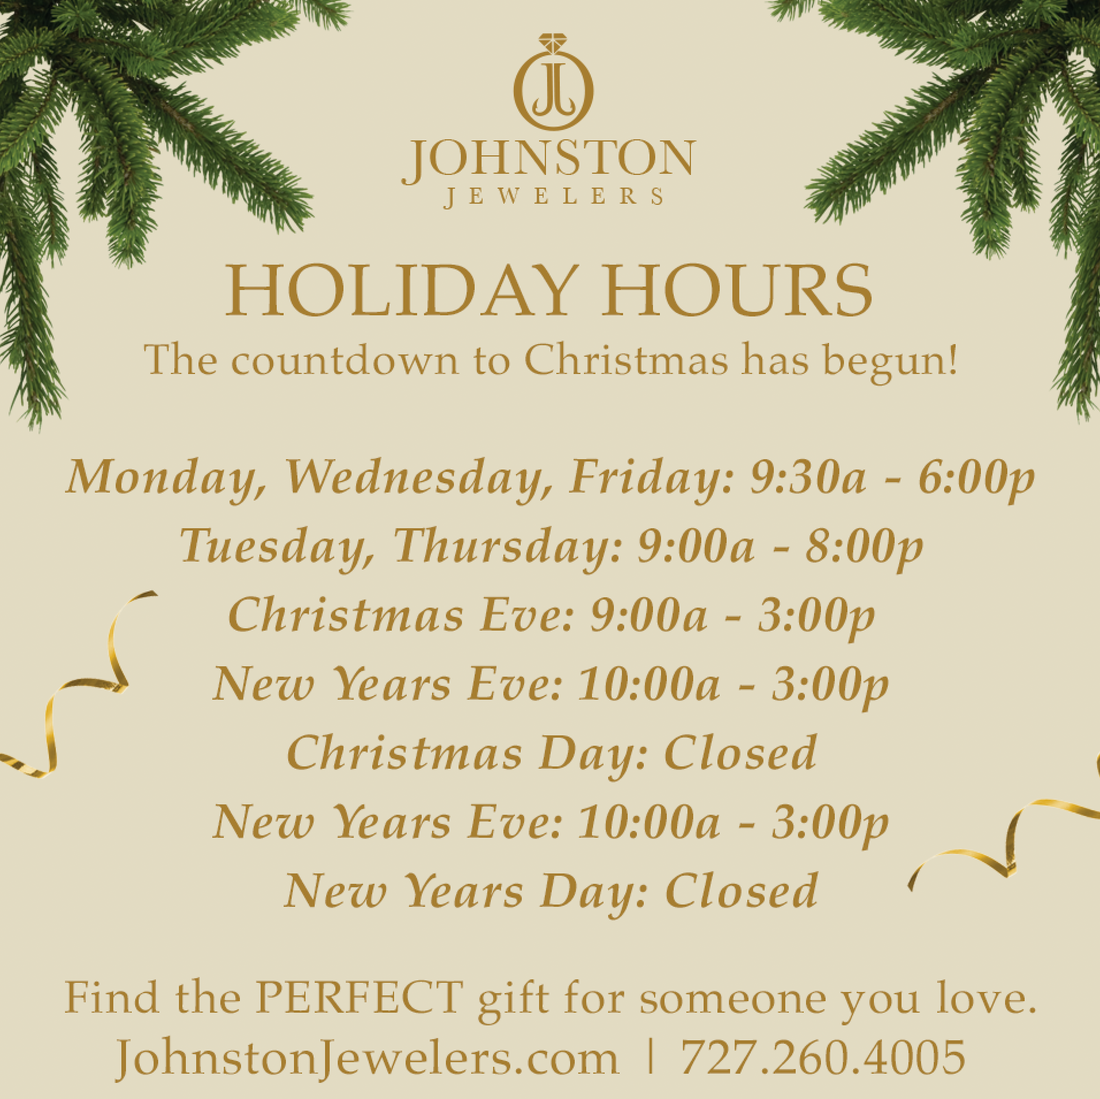 UPDATED HOLIDAY HOURS!